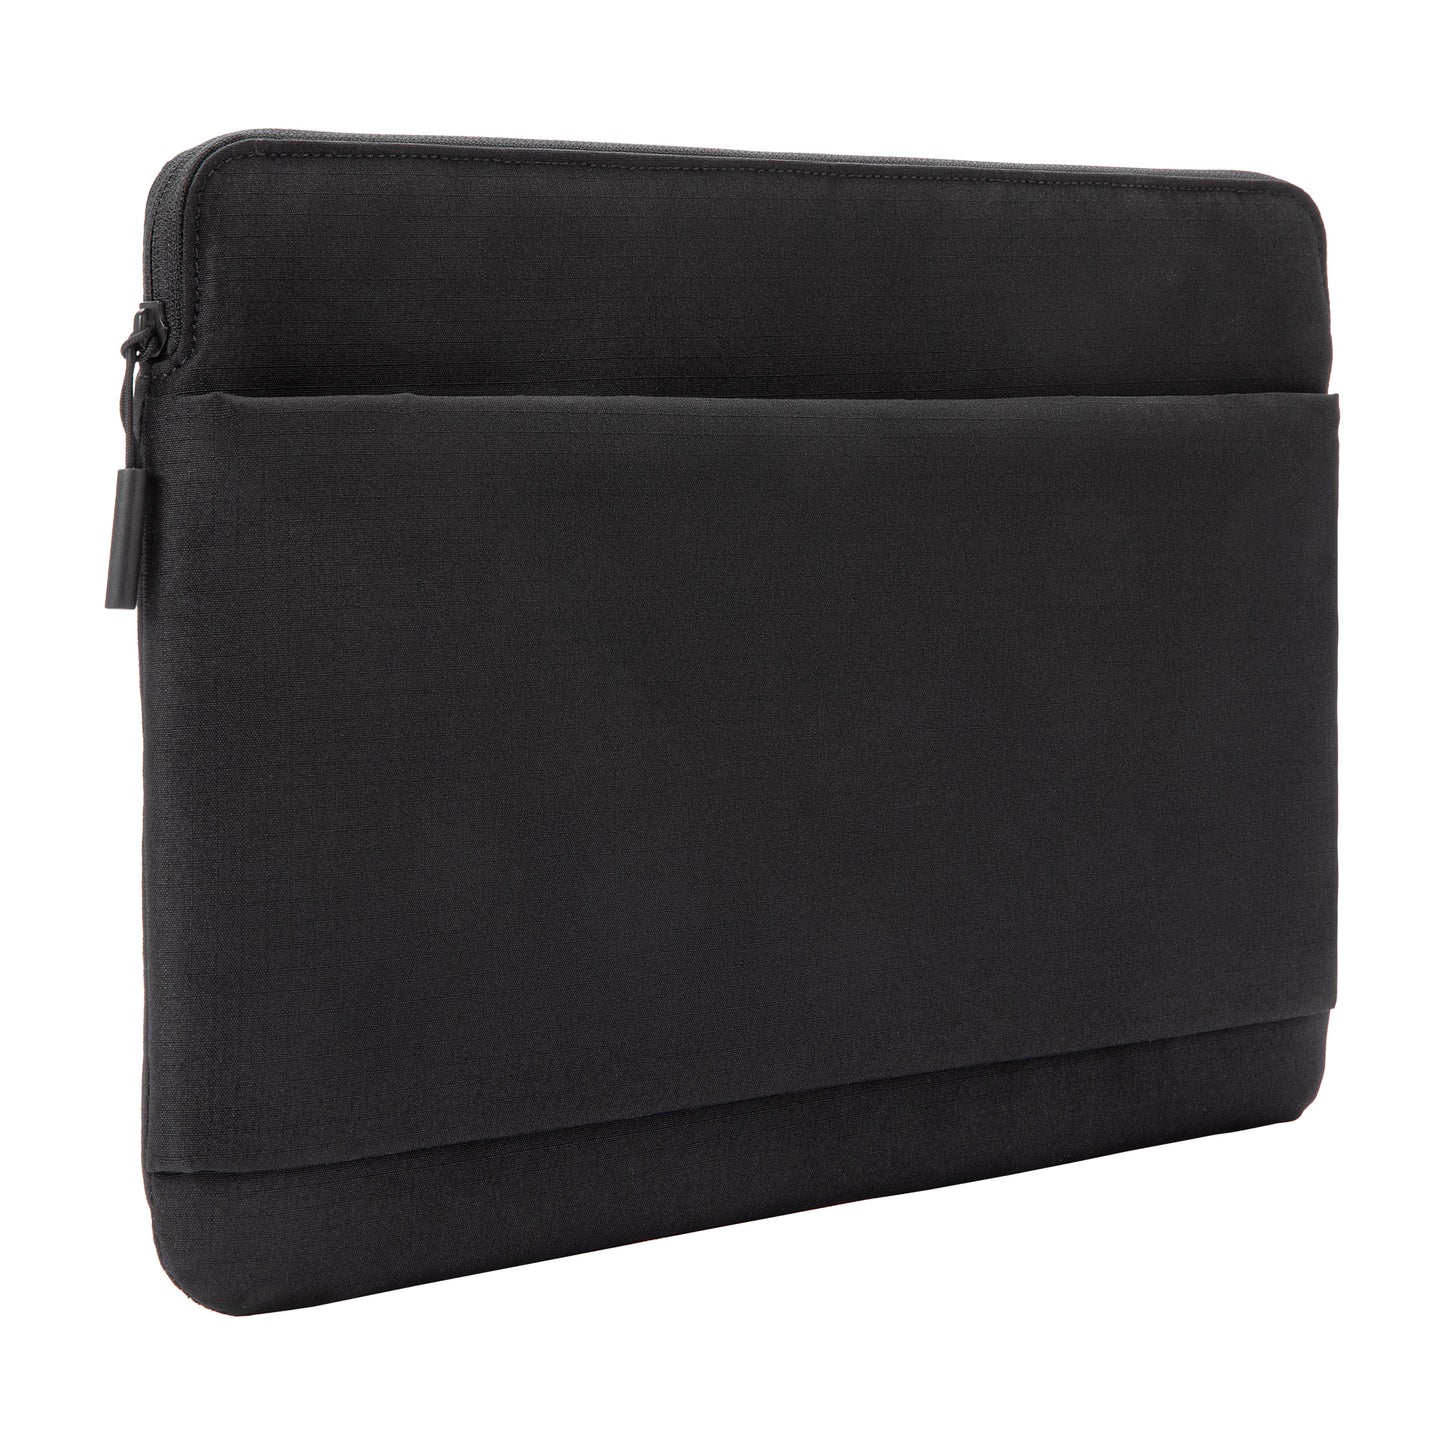 Go Sleeve for Up to 14" Laptop -Black-